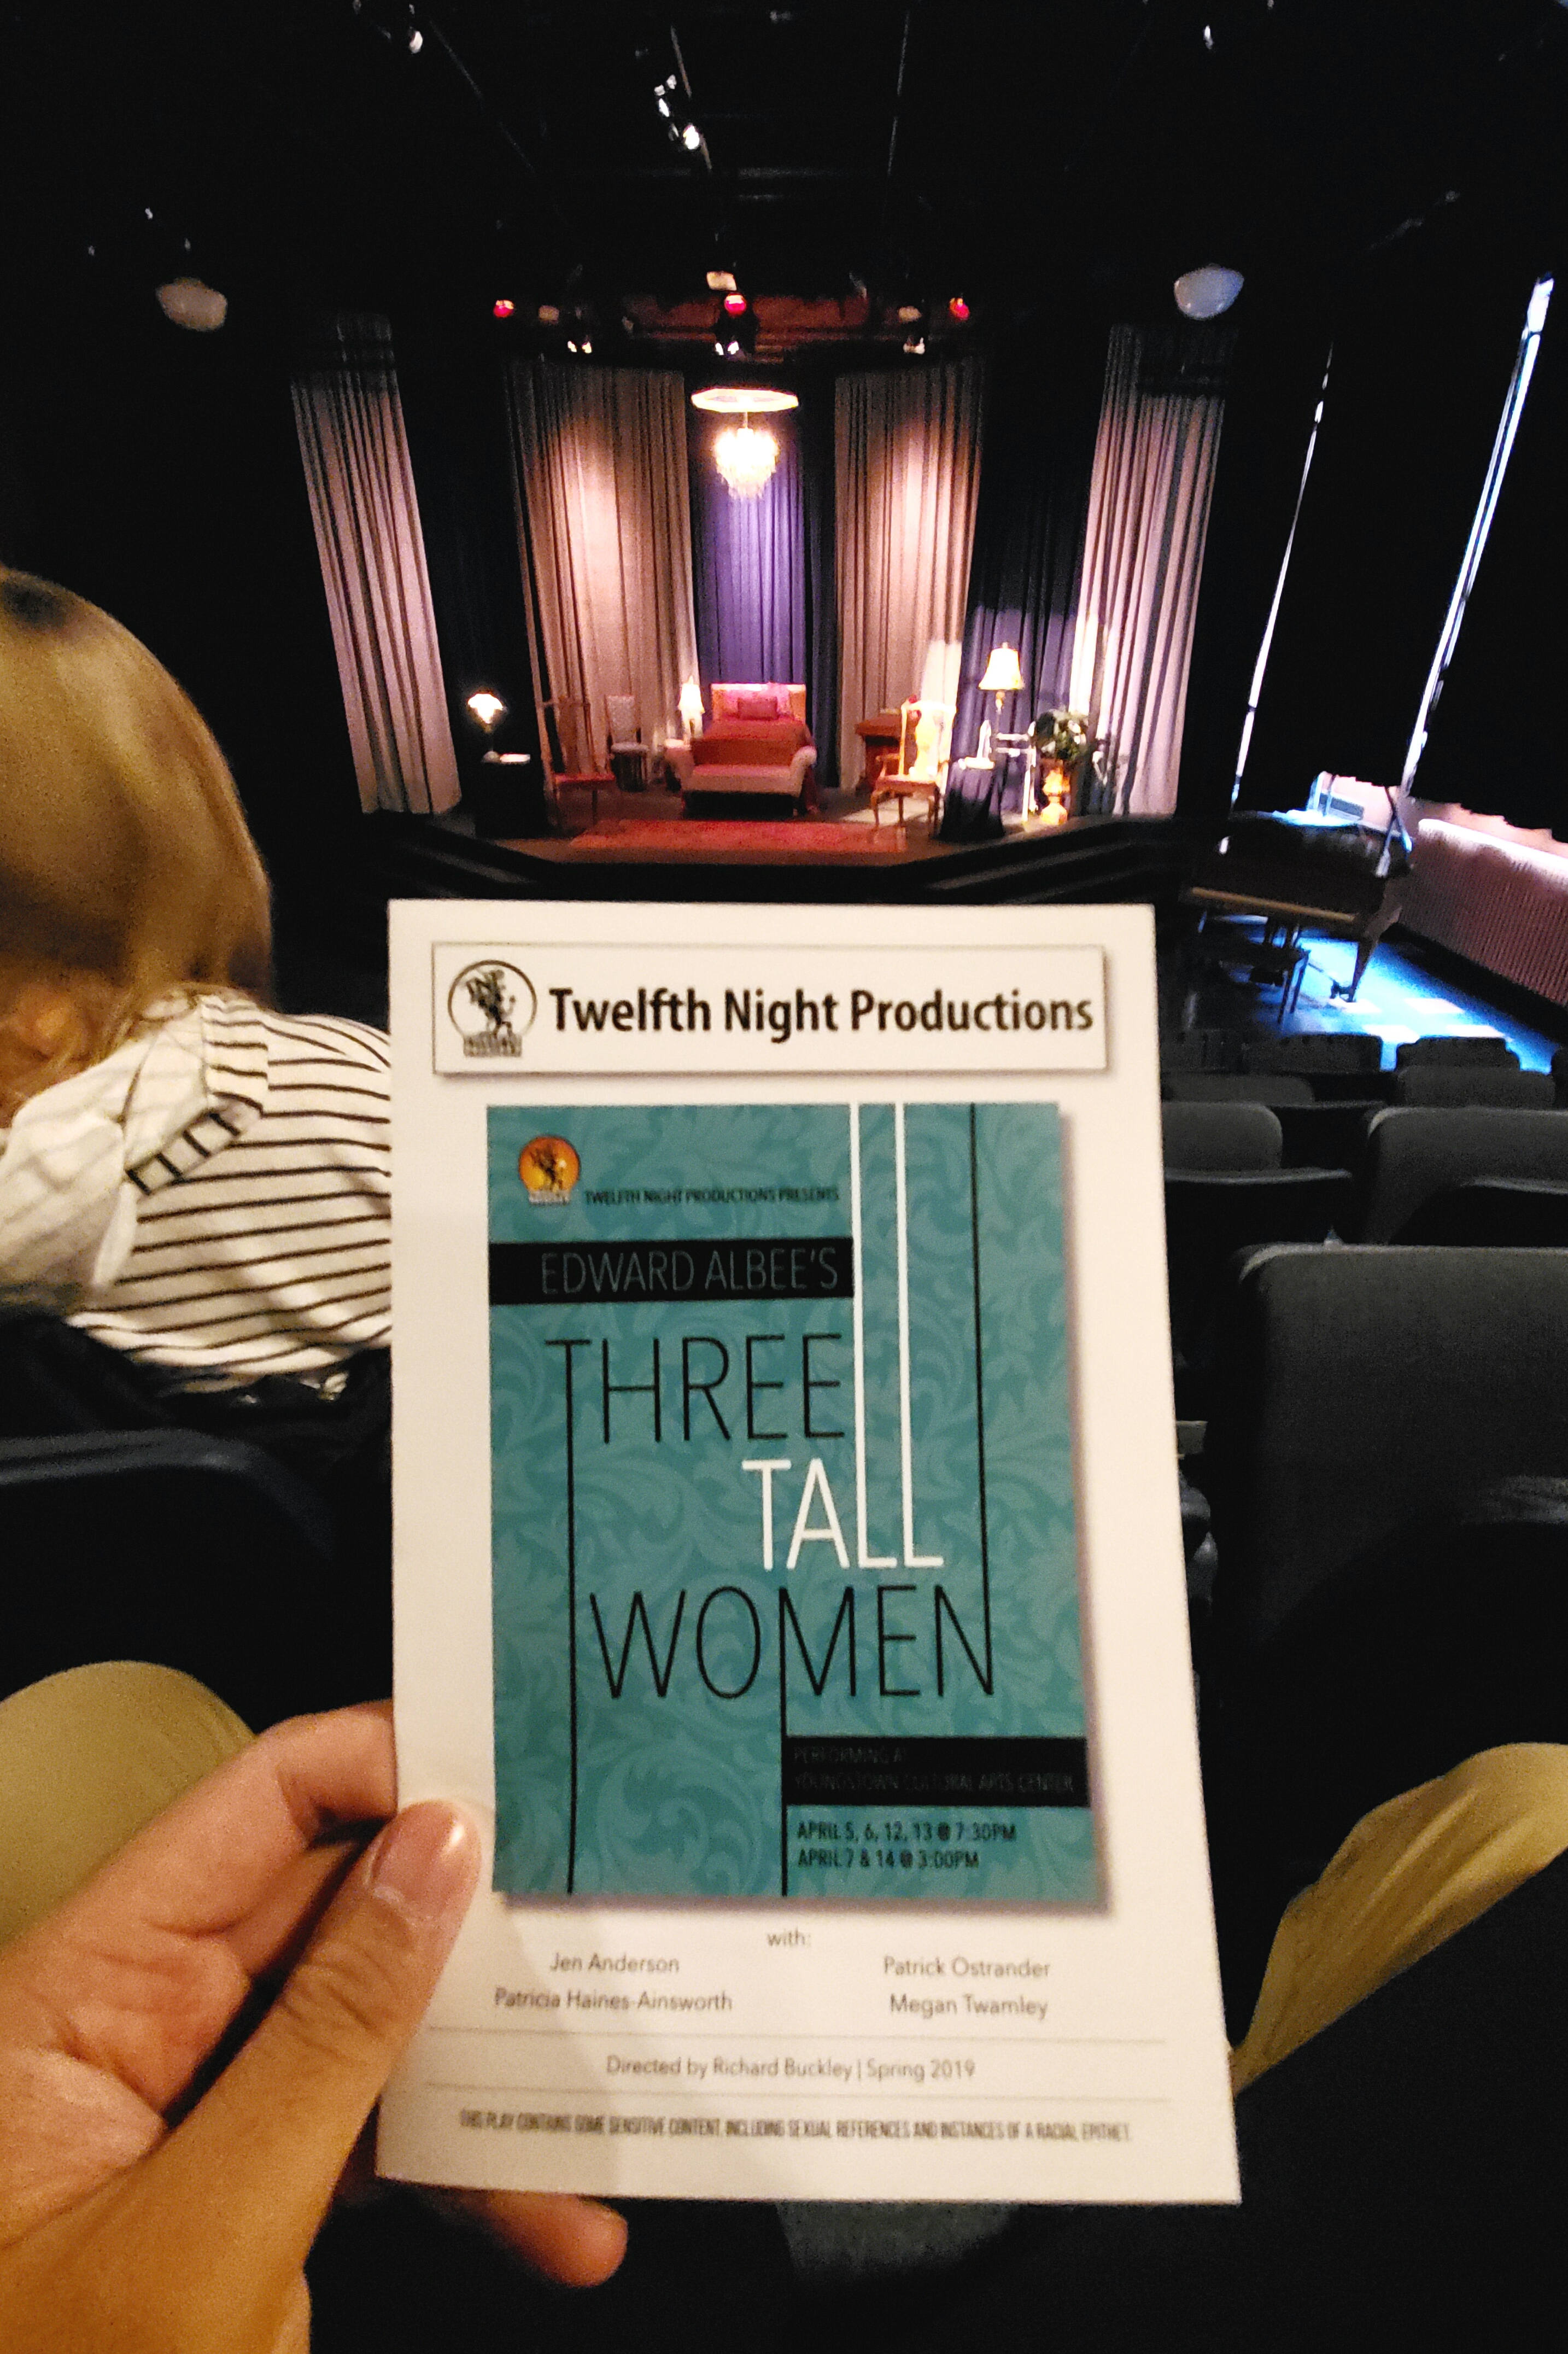 @ThreeTallWomen w/ @TNPSeattle. #Plotless #play where characters just sit around talking. Good lesson for millennials about the inevitable decline from invincible self-assured optimistic youth to senile broken mortal decrepitude. Impressive line memorization for the old lady.